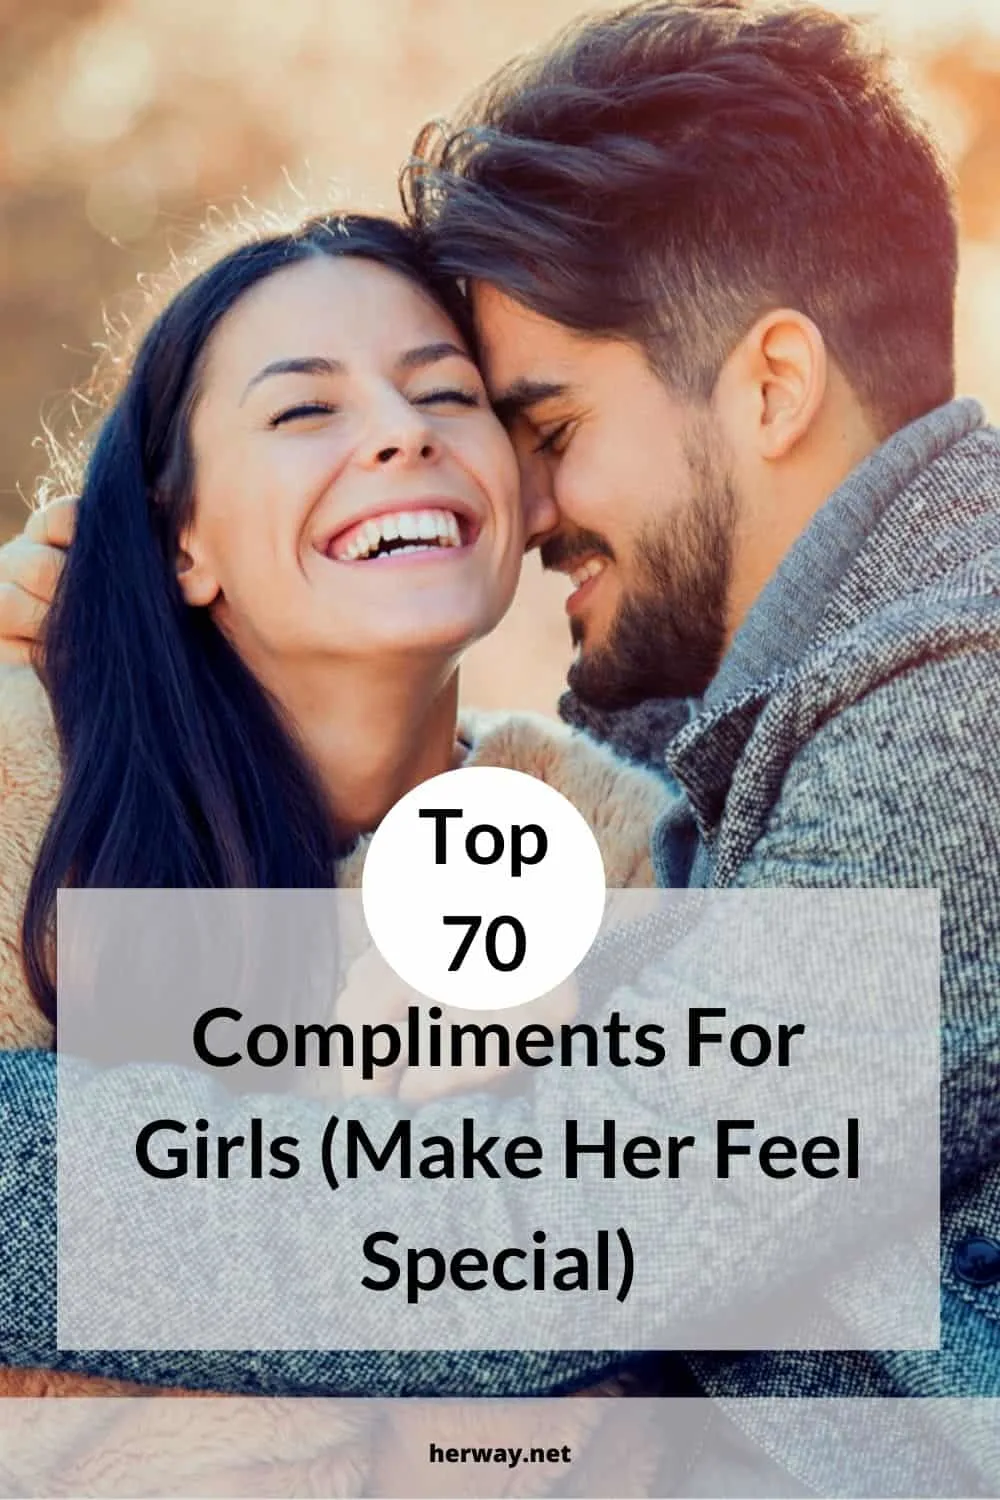 Top 70 Compliments For Girls (Make Her Feel Special)